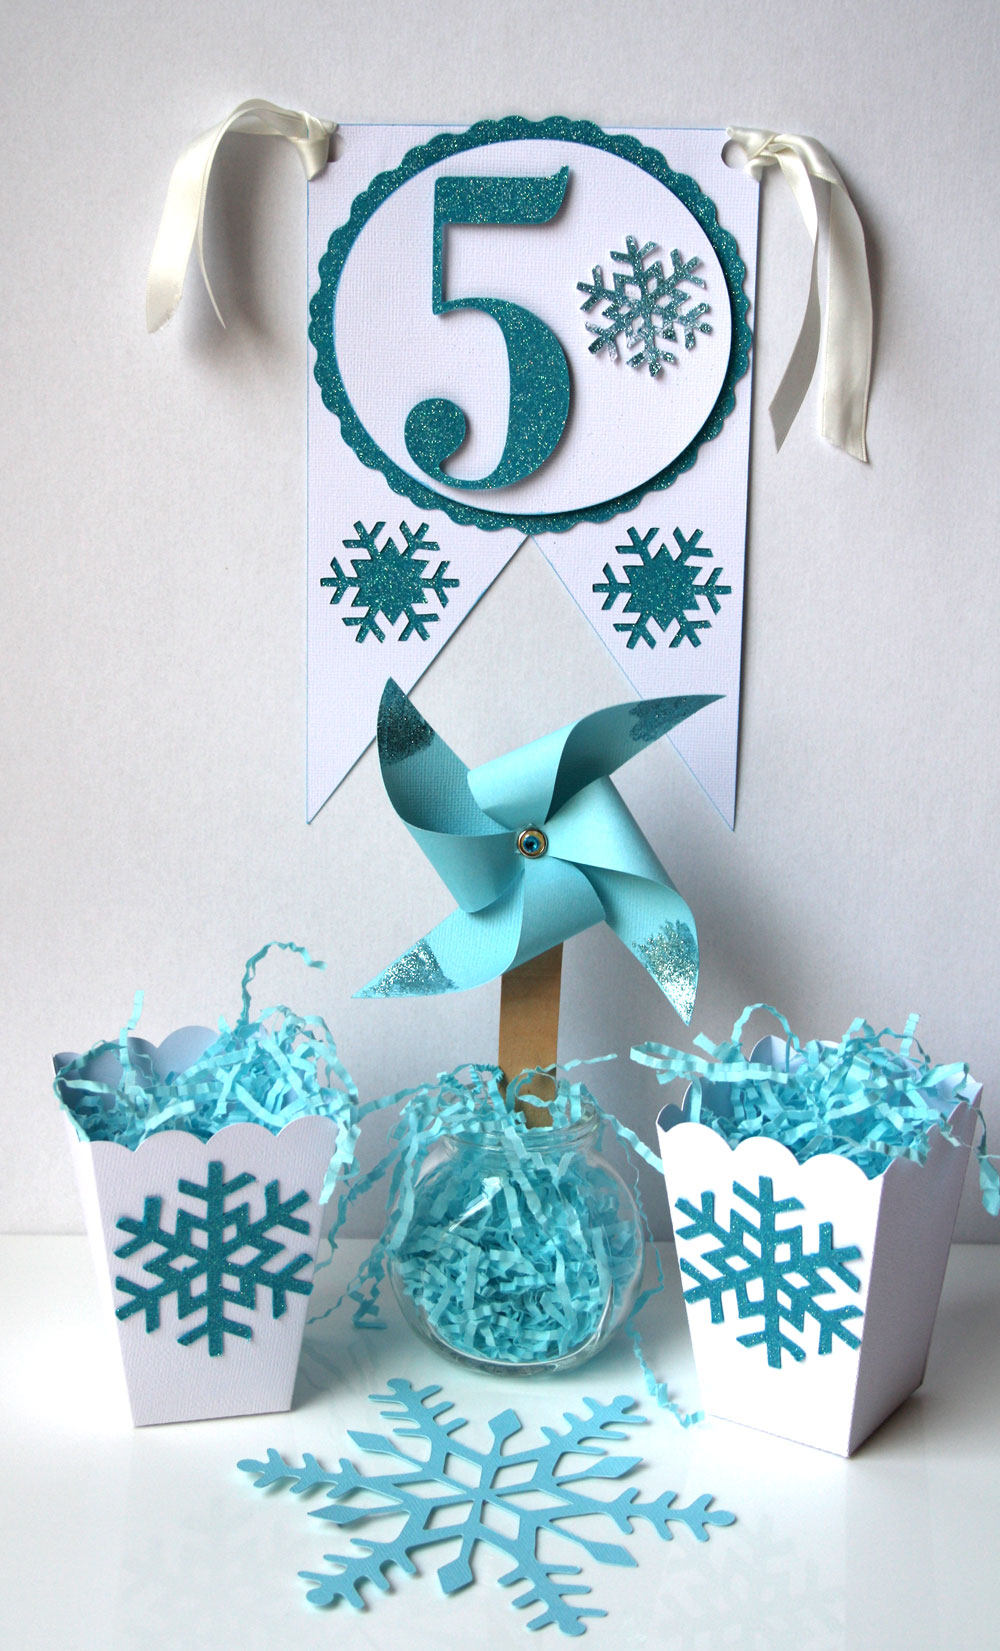 Snowflake Winter Party Favors - Pazzles Craft Room